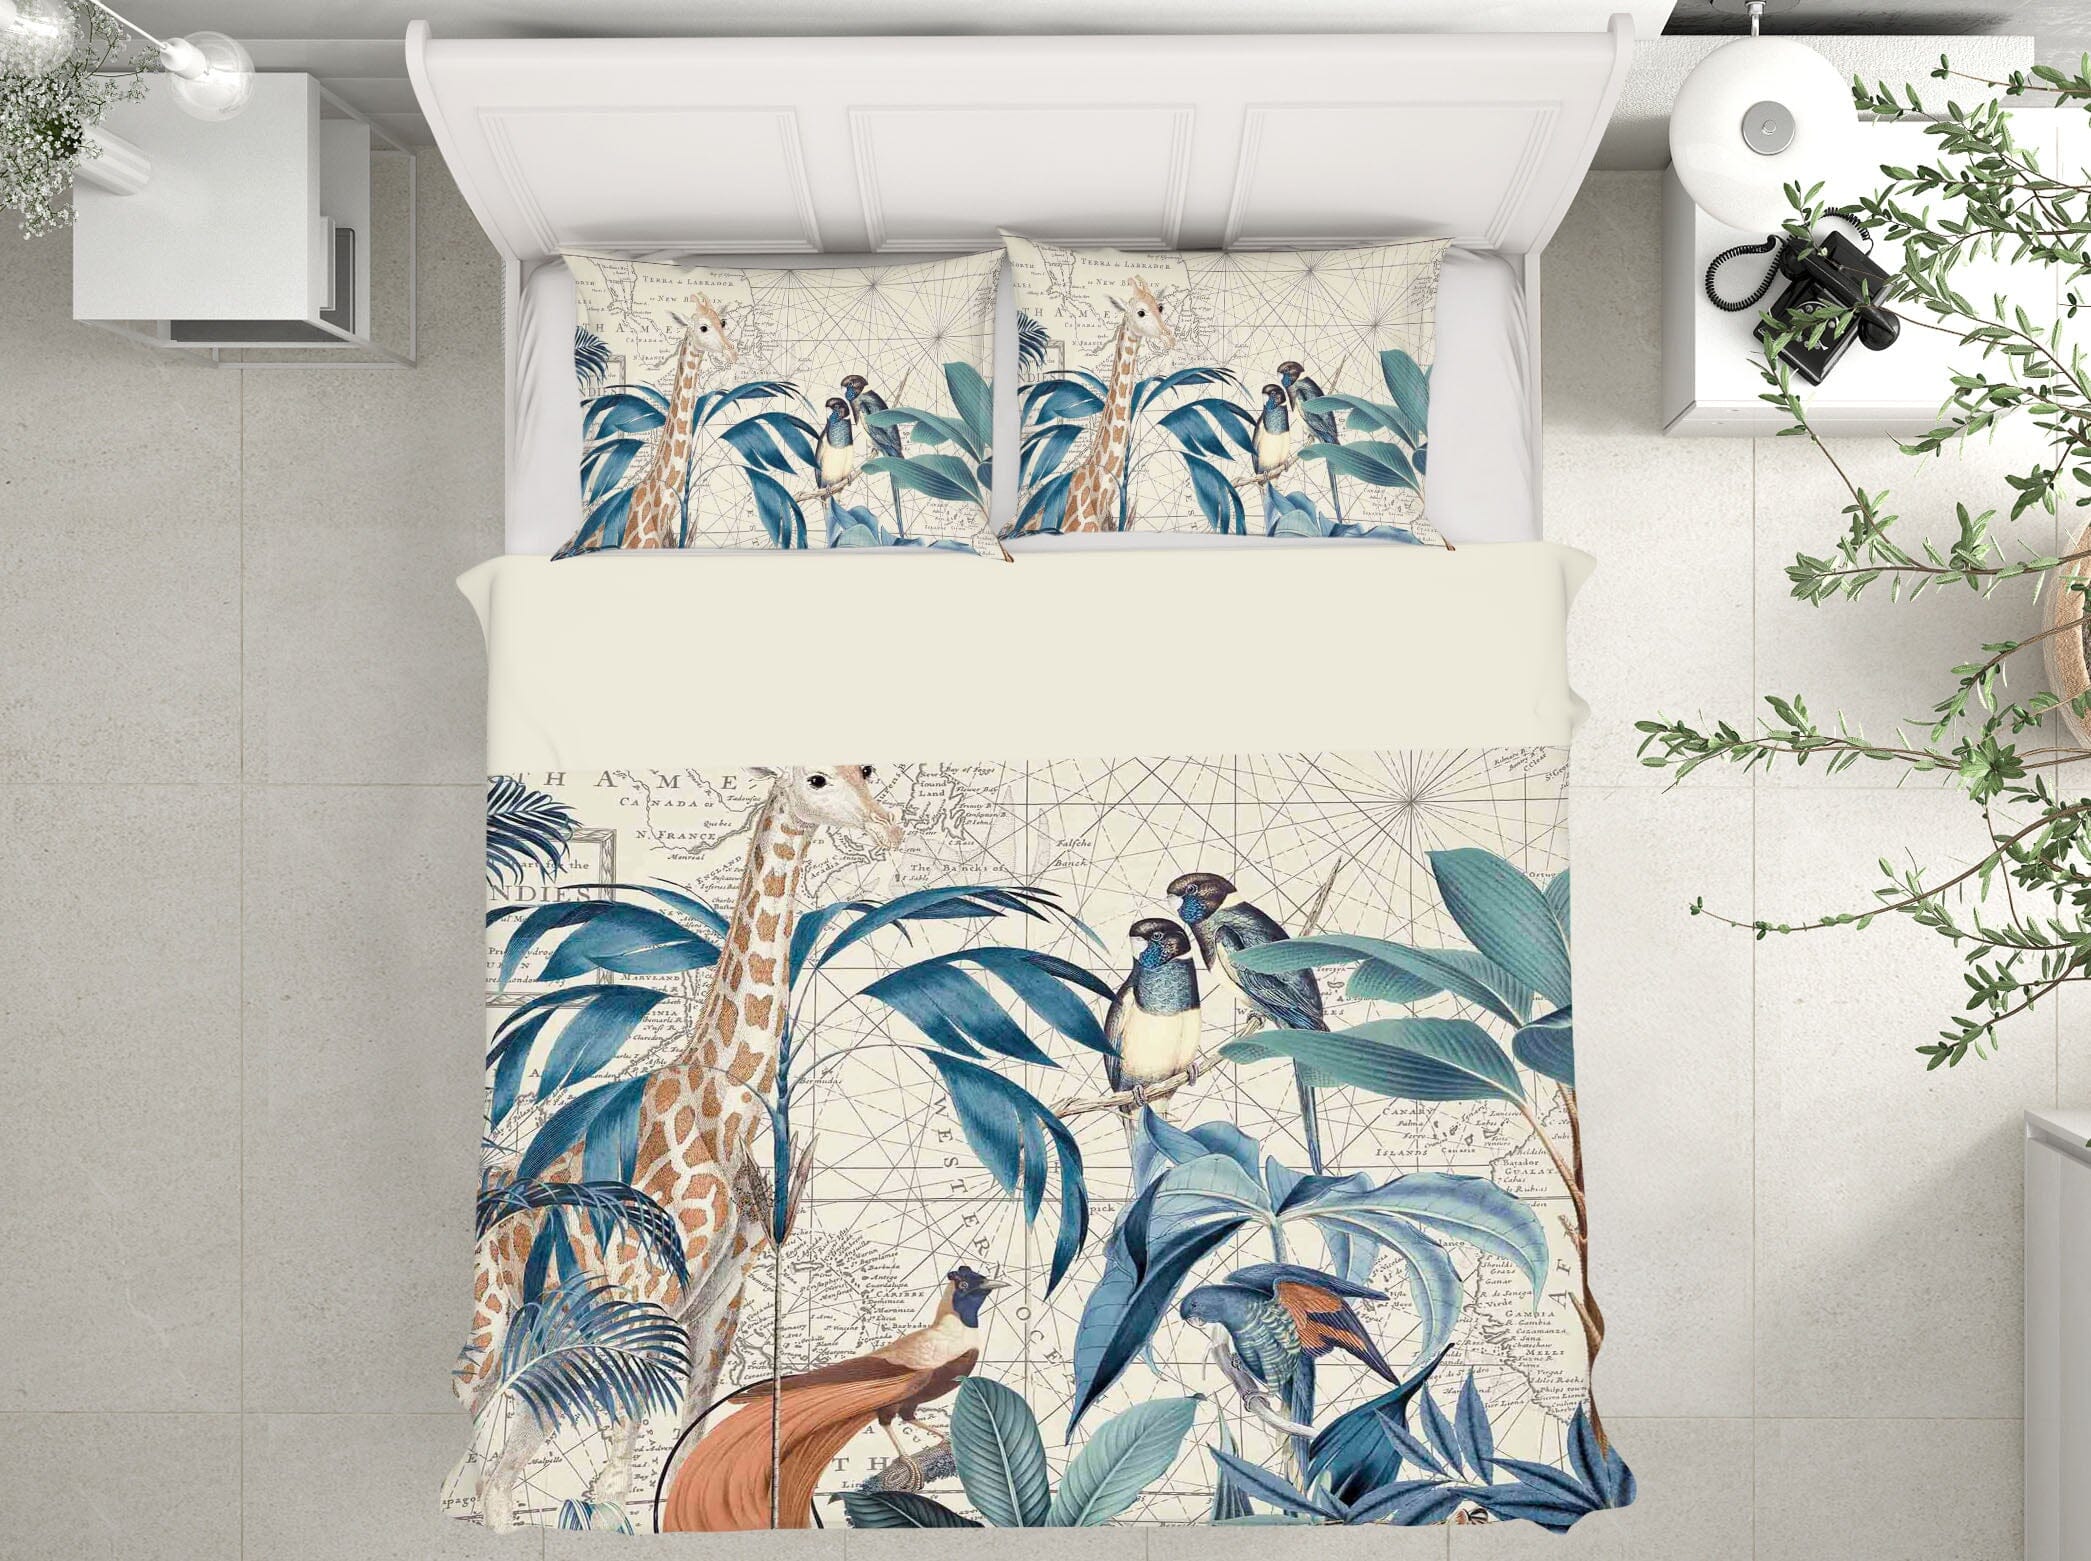 3D Palm Tree Map 2146 Andrea haase Bedding Bed Pillowcases Quilt Quiet Covers AJ Creativity Home 